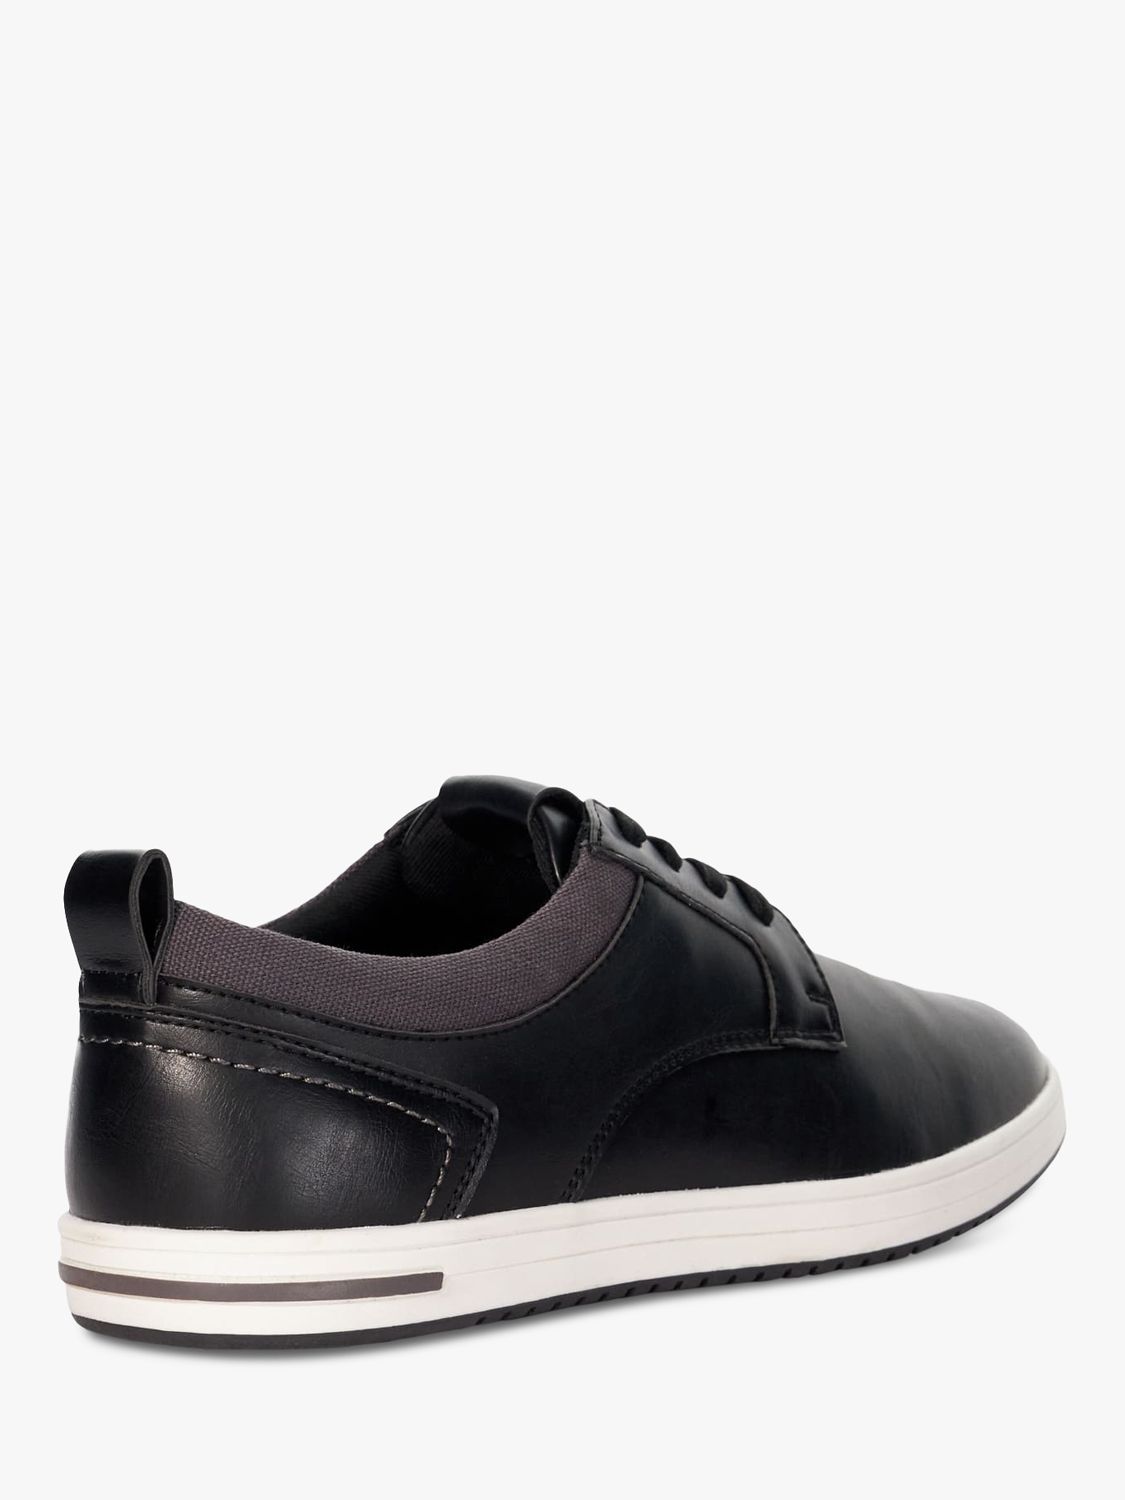 Buy Dune Travels Lace Up Trainers, Black Online at johnlewis.com